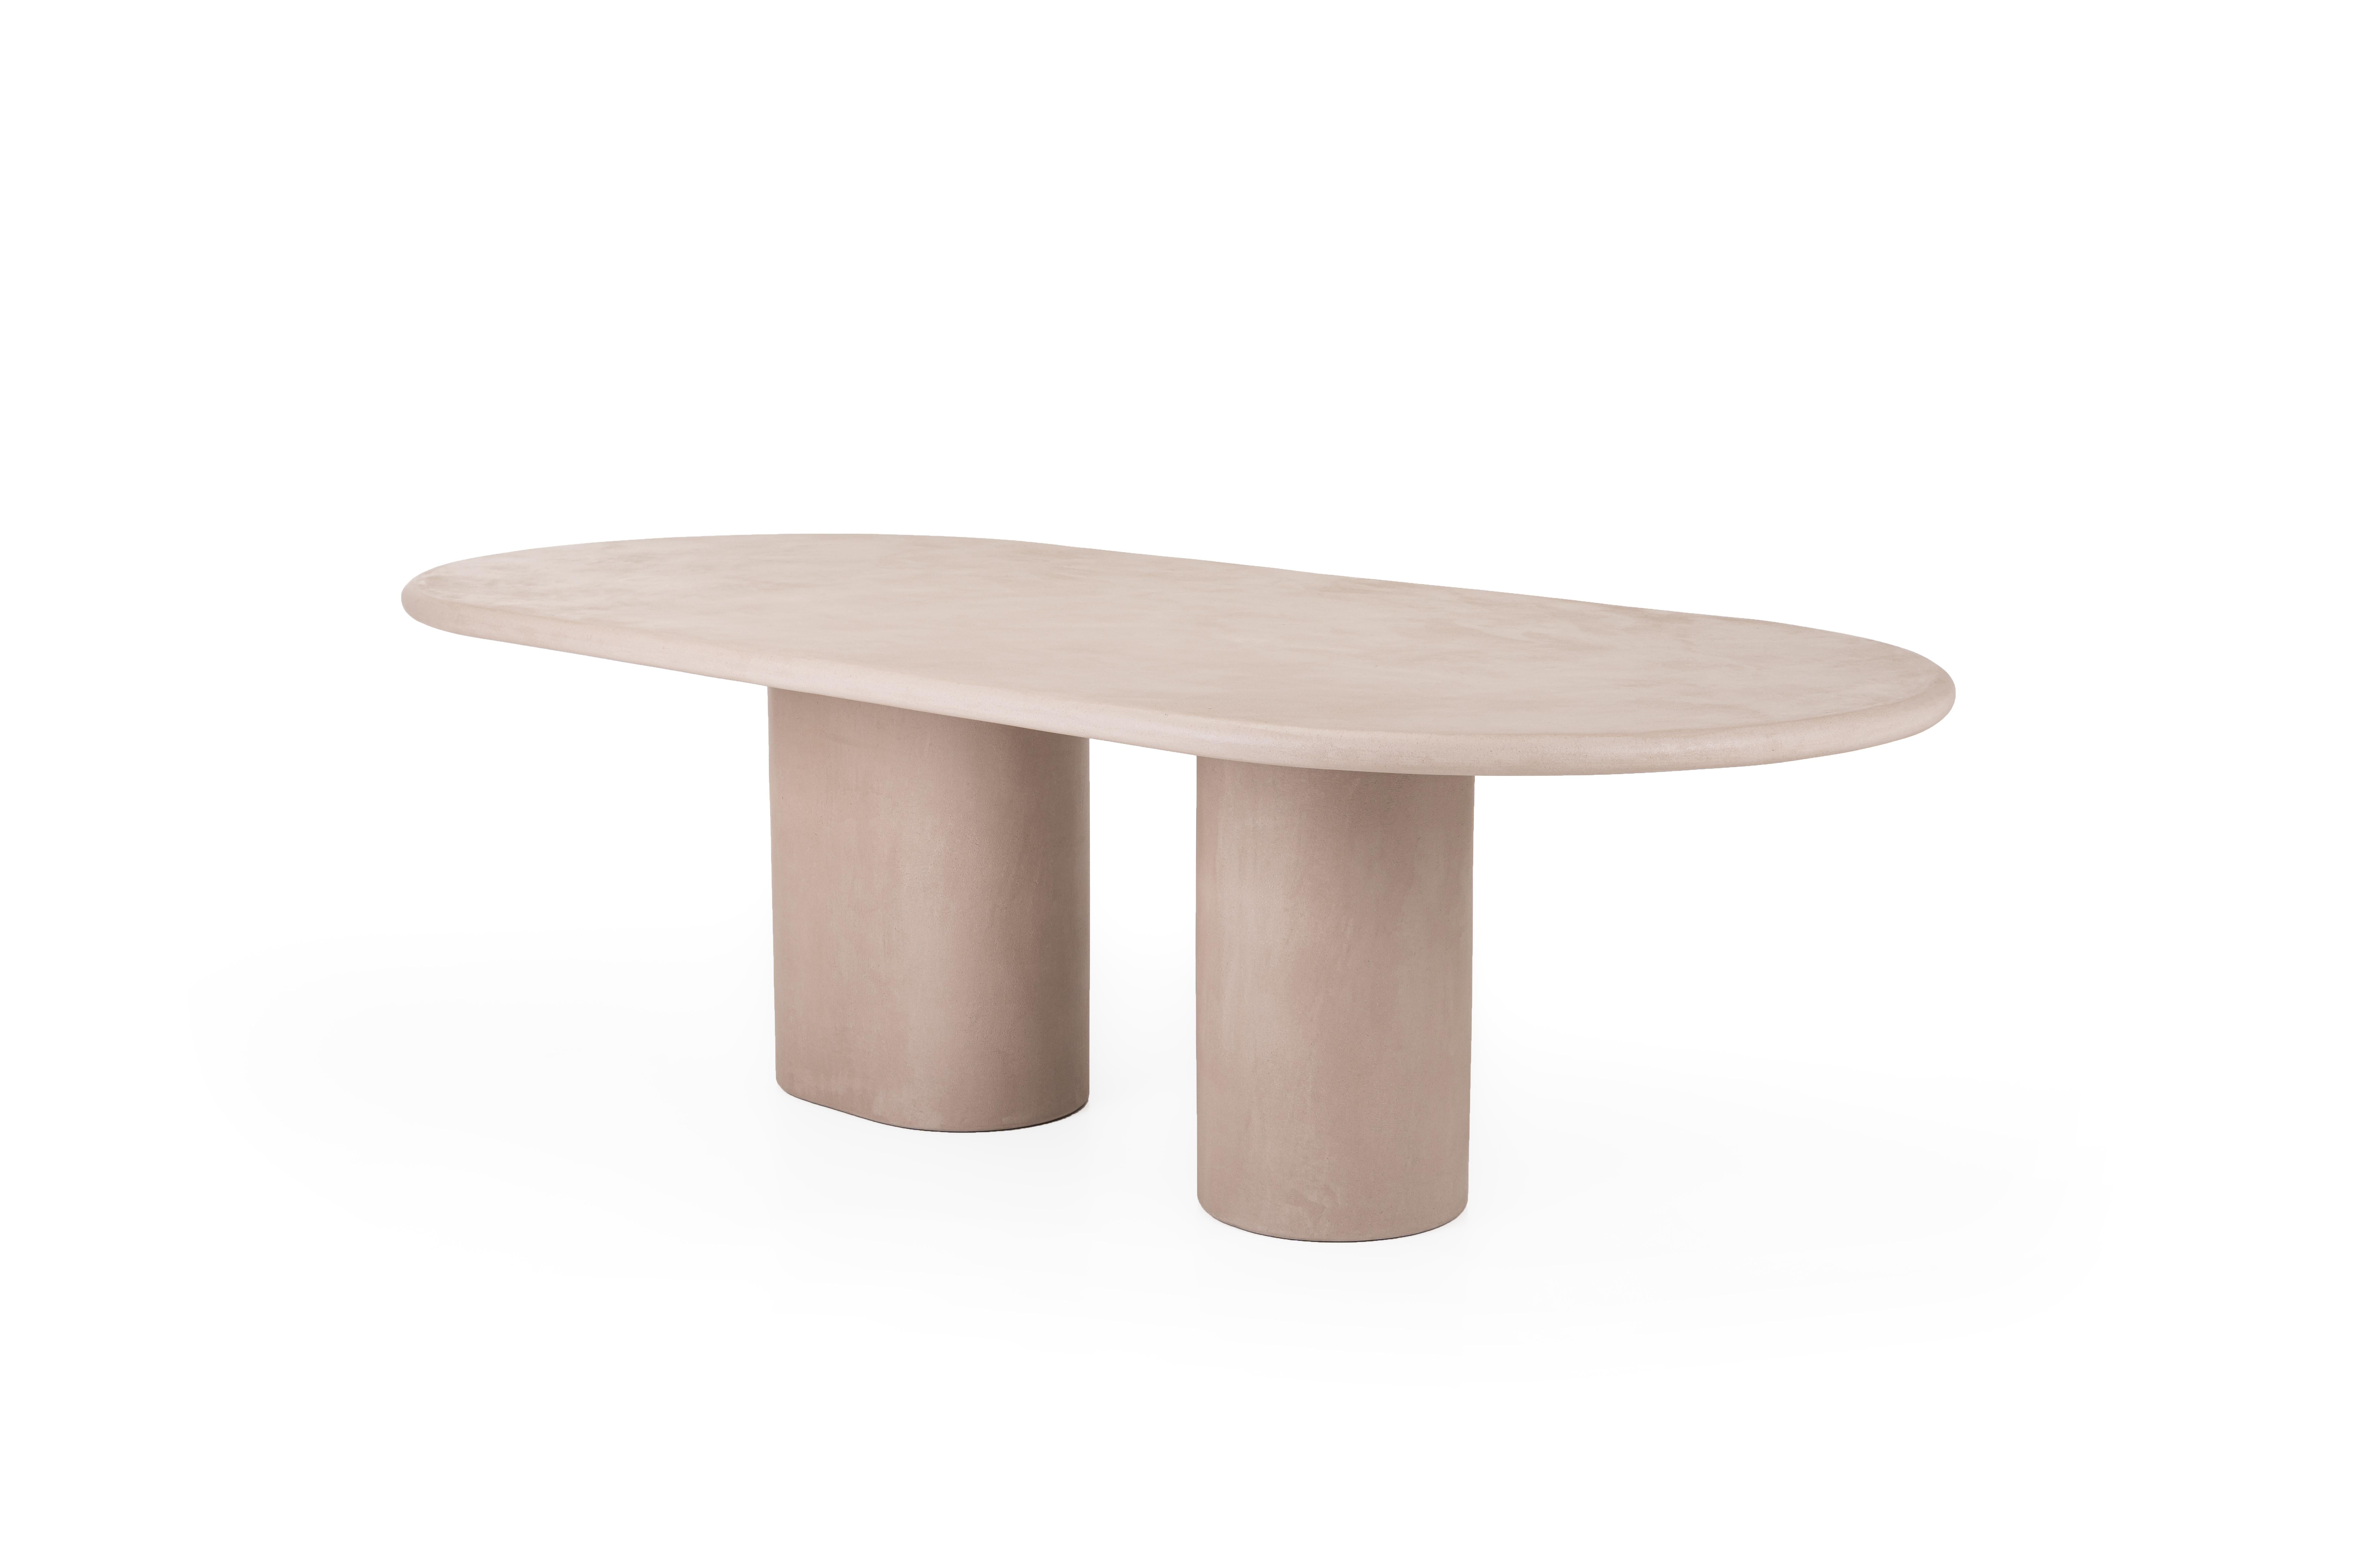 Contemporary Rounded Natural Plaster "Column" Table 280 cm by Isabelle Beaumont For Sale